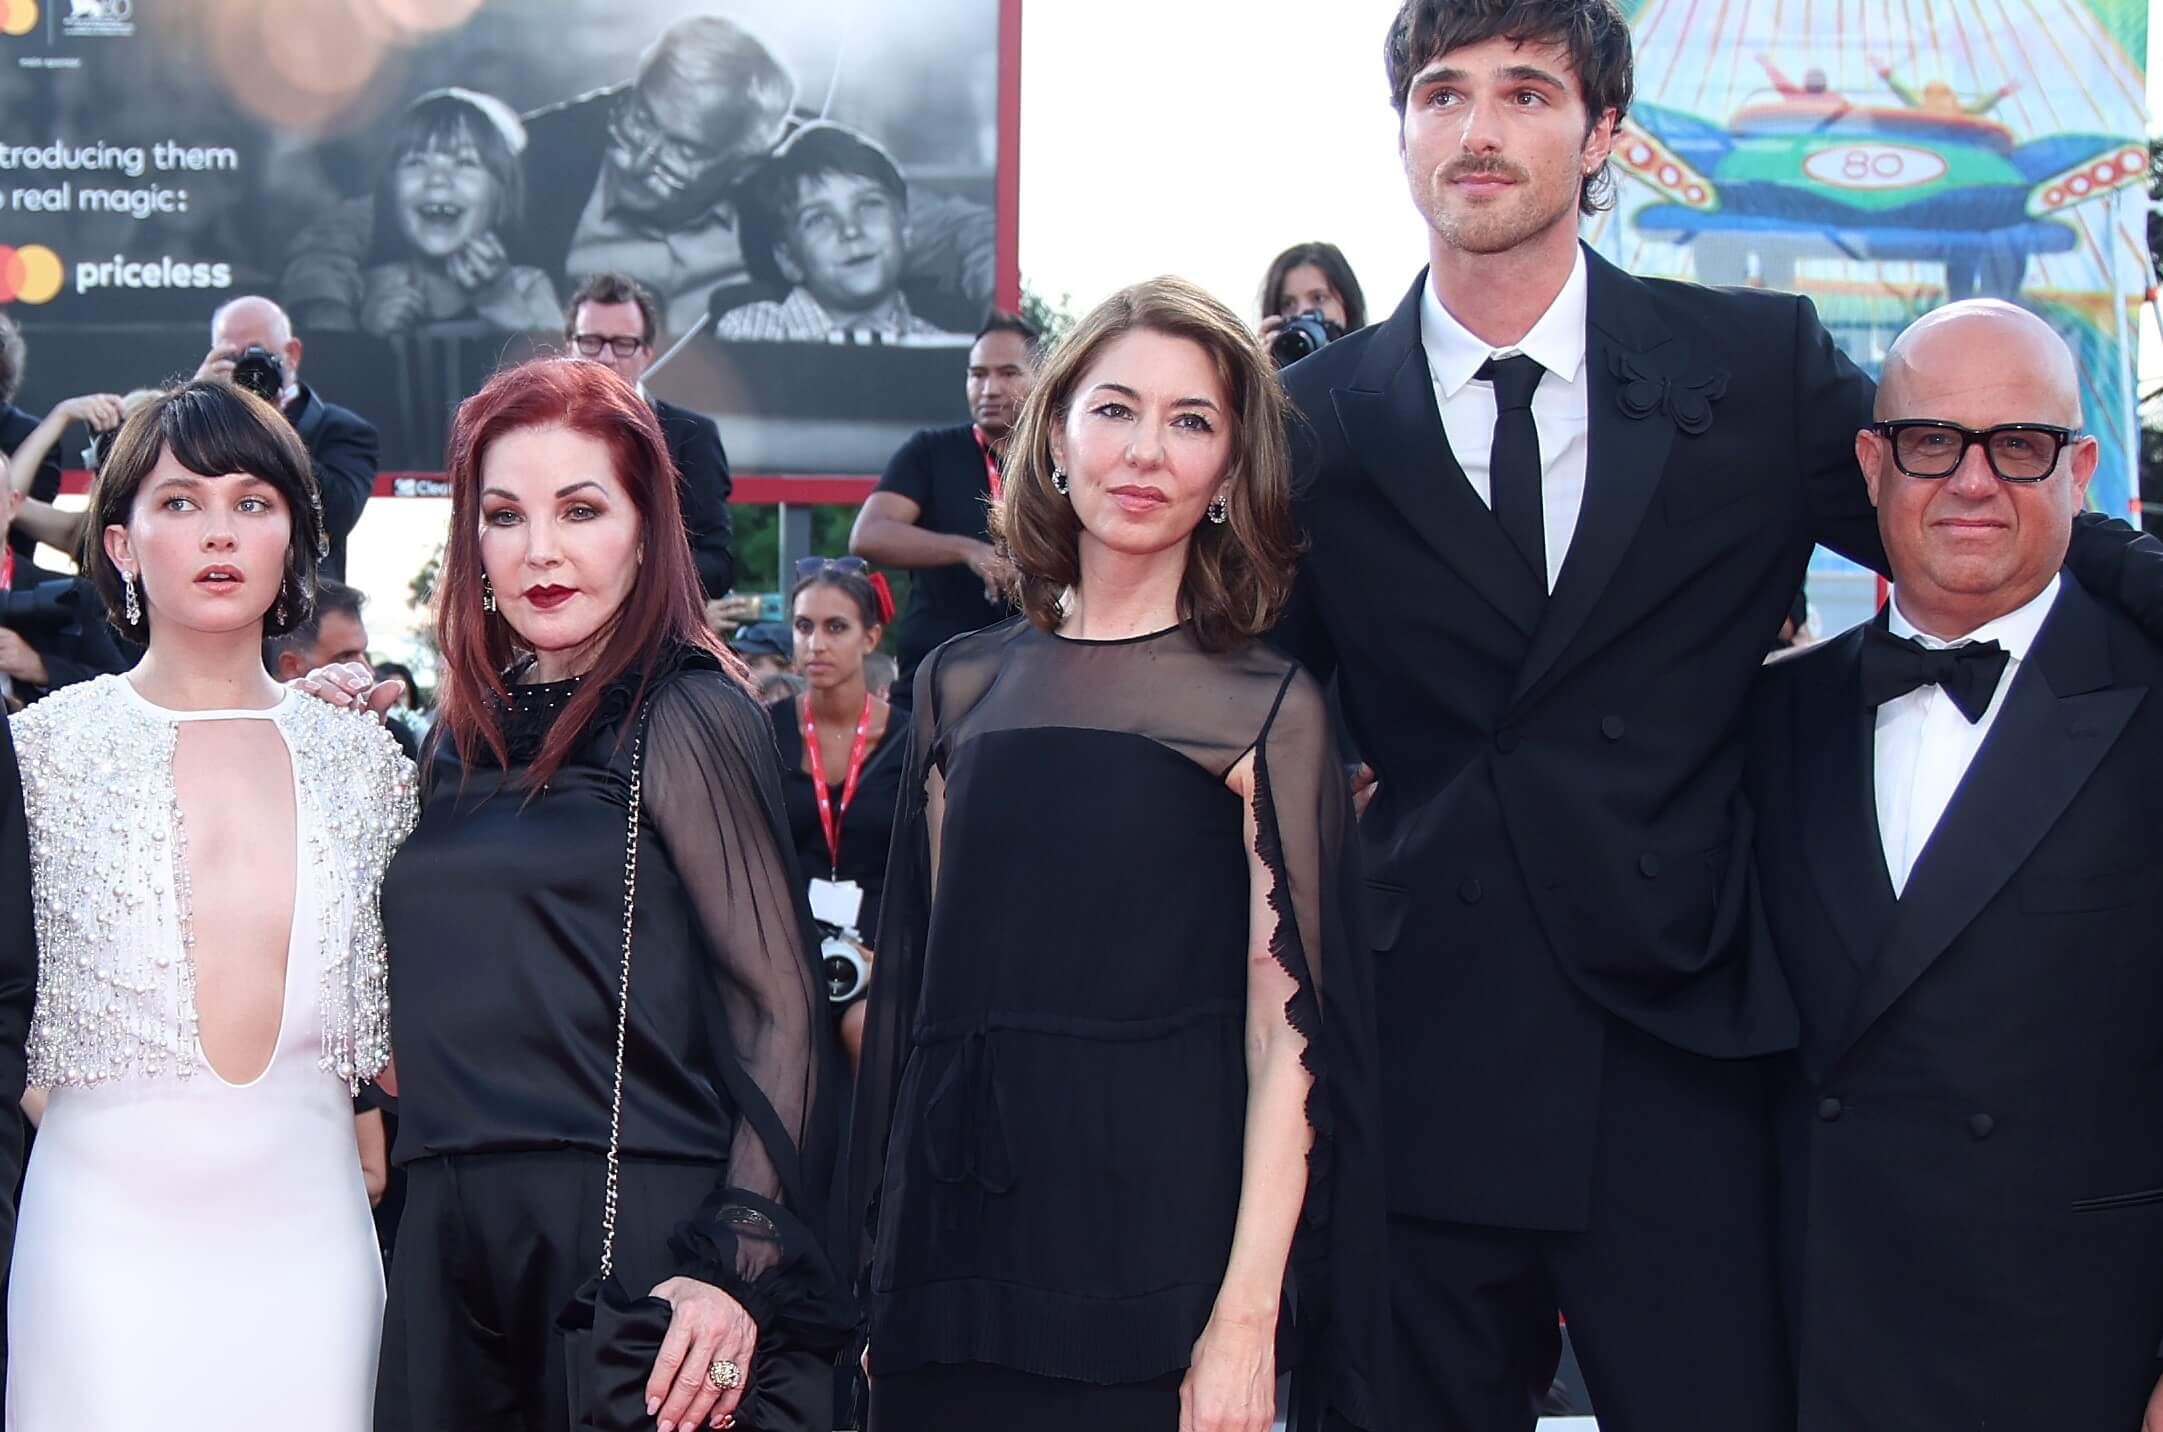 Cailee Spaeny, Priscilla Presley, Sofia Coppola, Jacob Elordi, and Youree Henley at a red carpet for the movie 'Priscilla'